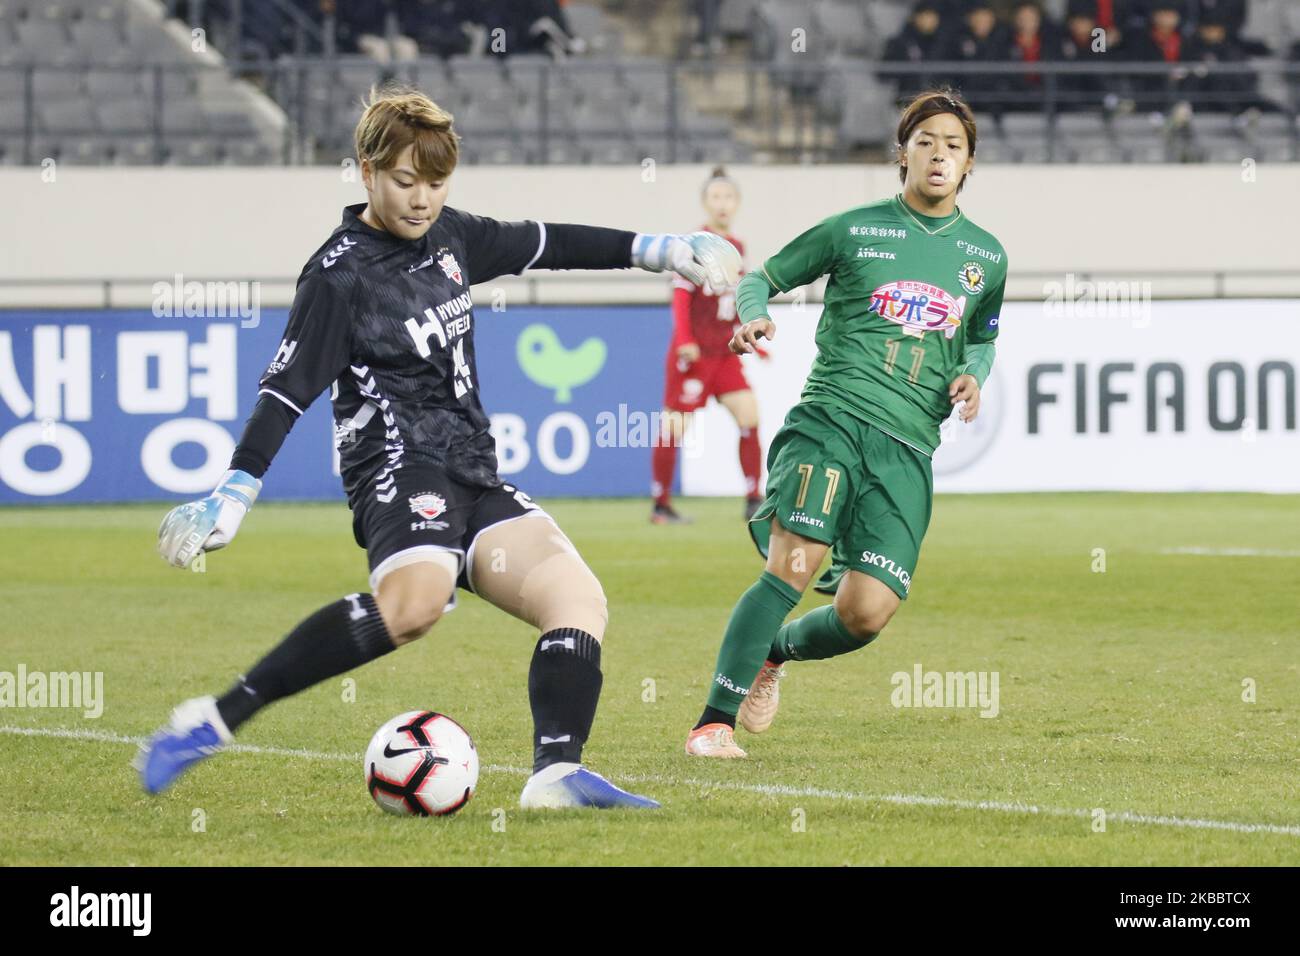 Min-jeong Kim, goalkeeper of Hyundai Steel Red Angels of South Korea and Rikako Kobayashi of Nippon TV Belaza of Japan in action during an Women's Club Championship 2019-FIFA/AFC Pilot Tournament between Incheon Hyundai Steel Red Angels v Nippon TV Beleza on 28 November 2019 at Yongin Citizens Park in Yongin, South Korea. (Photo by Seung-il Ryu/NurPhoto) Stock Photo